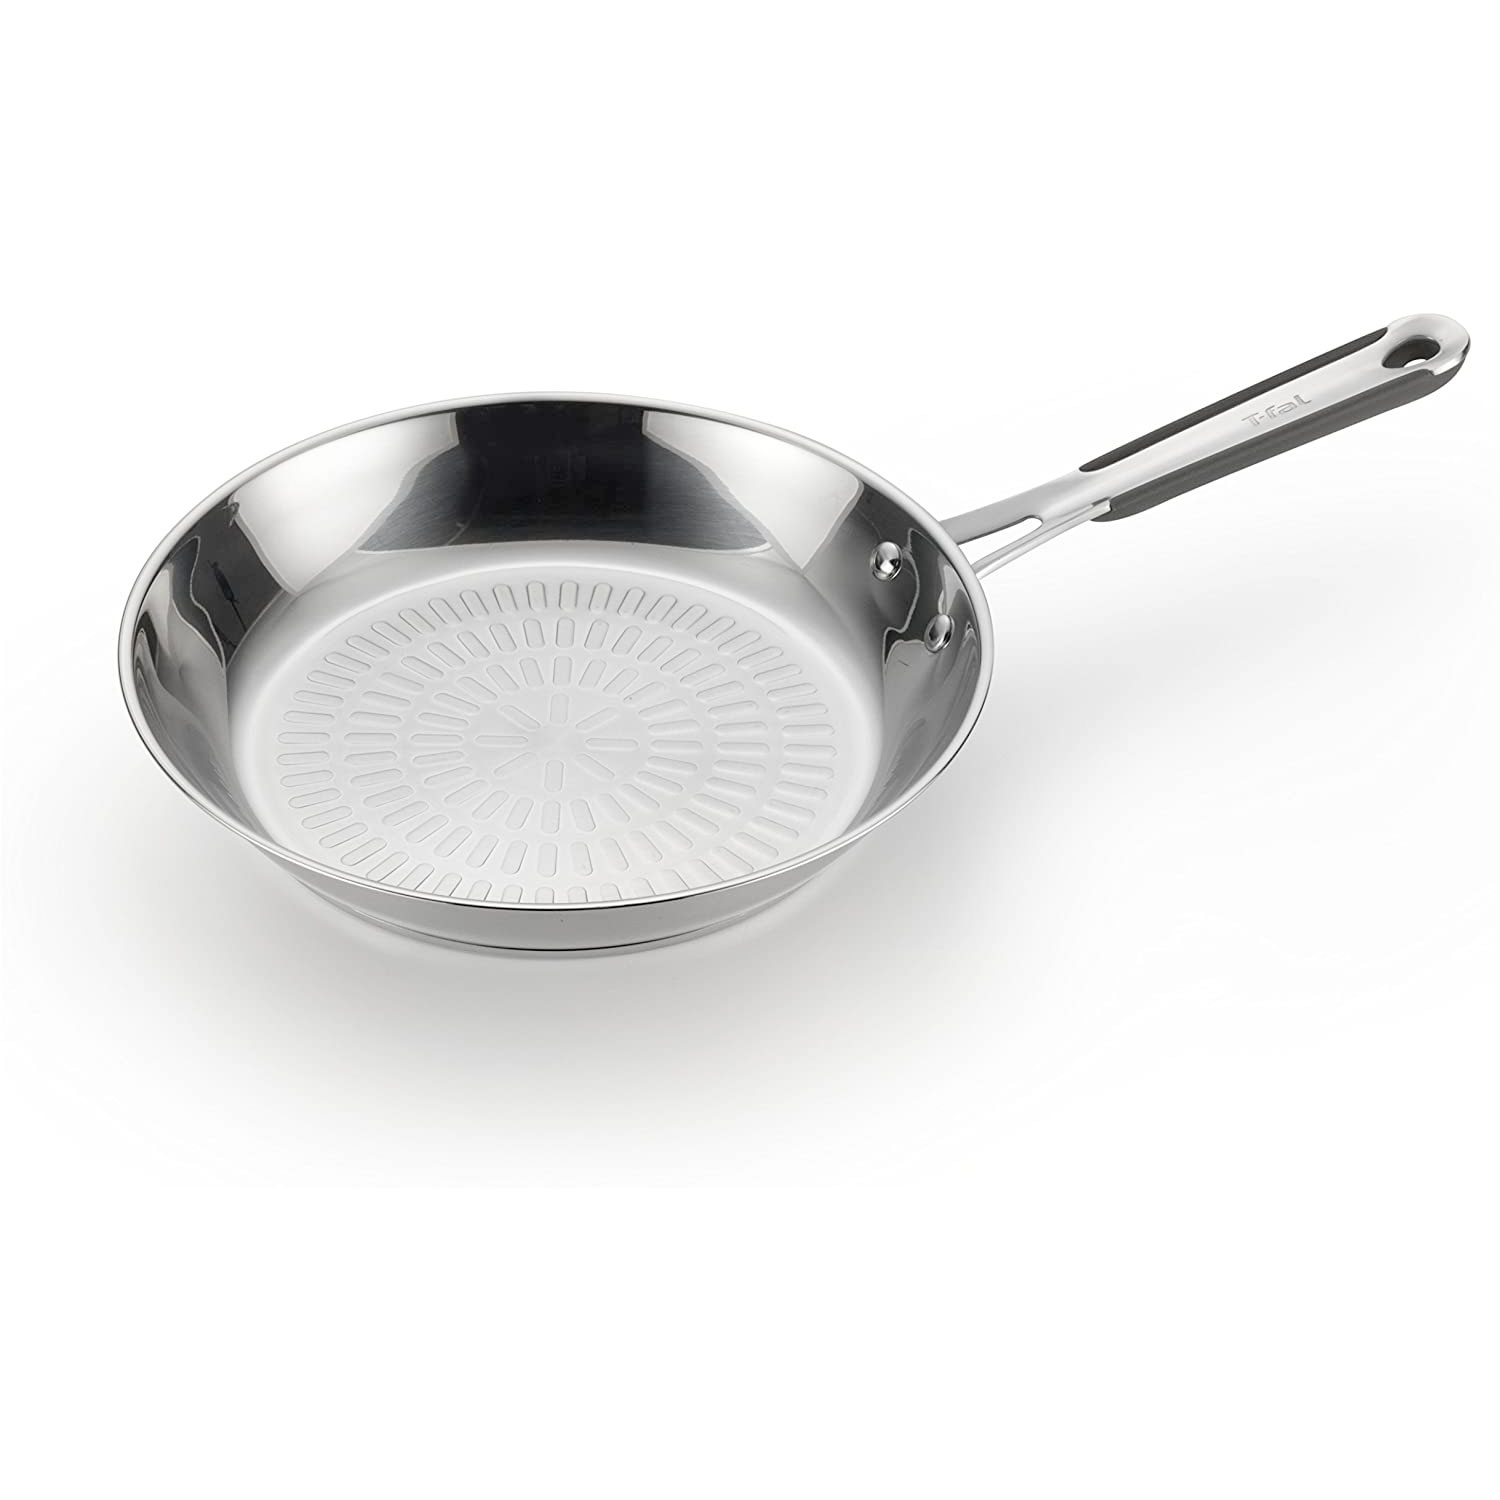 Amazon：T-fal Stainless Steel Frypan(26cm)只賣$14.92